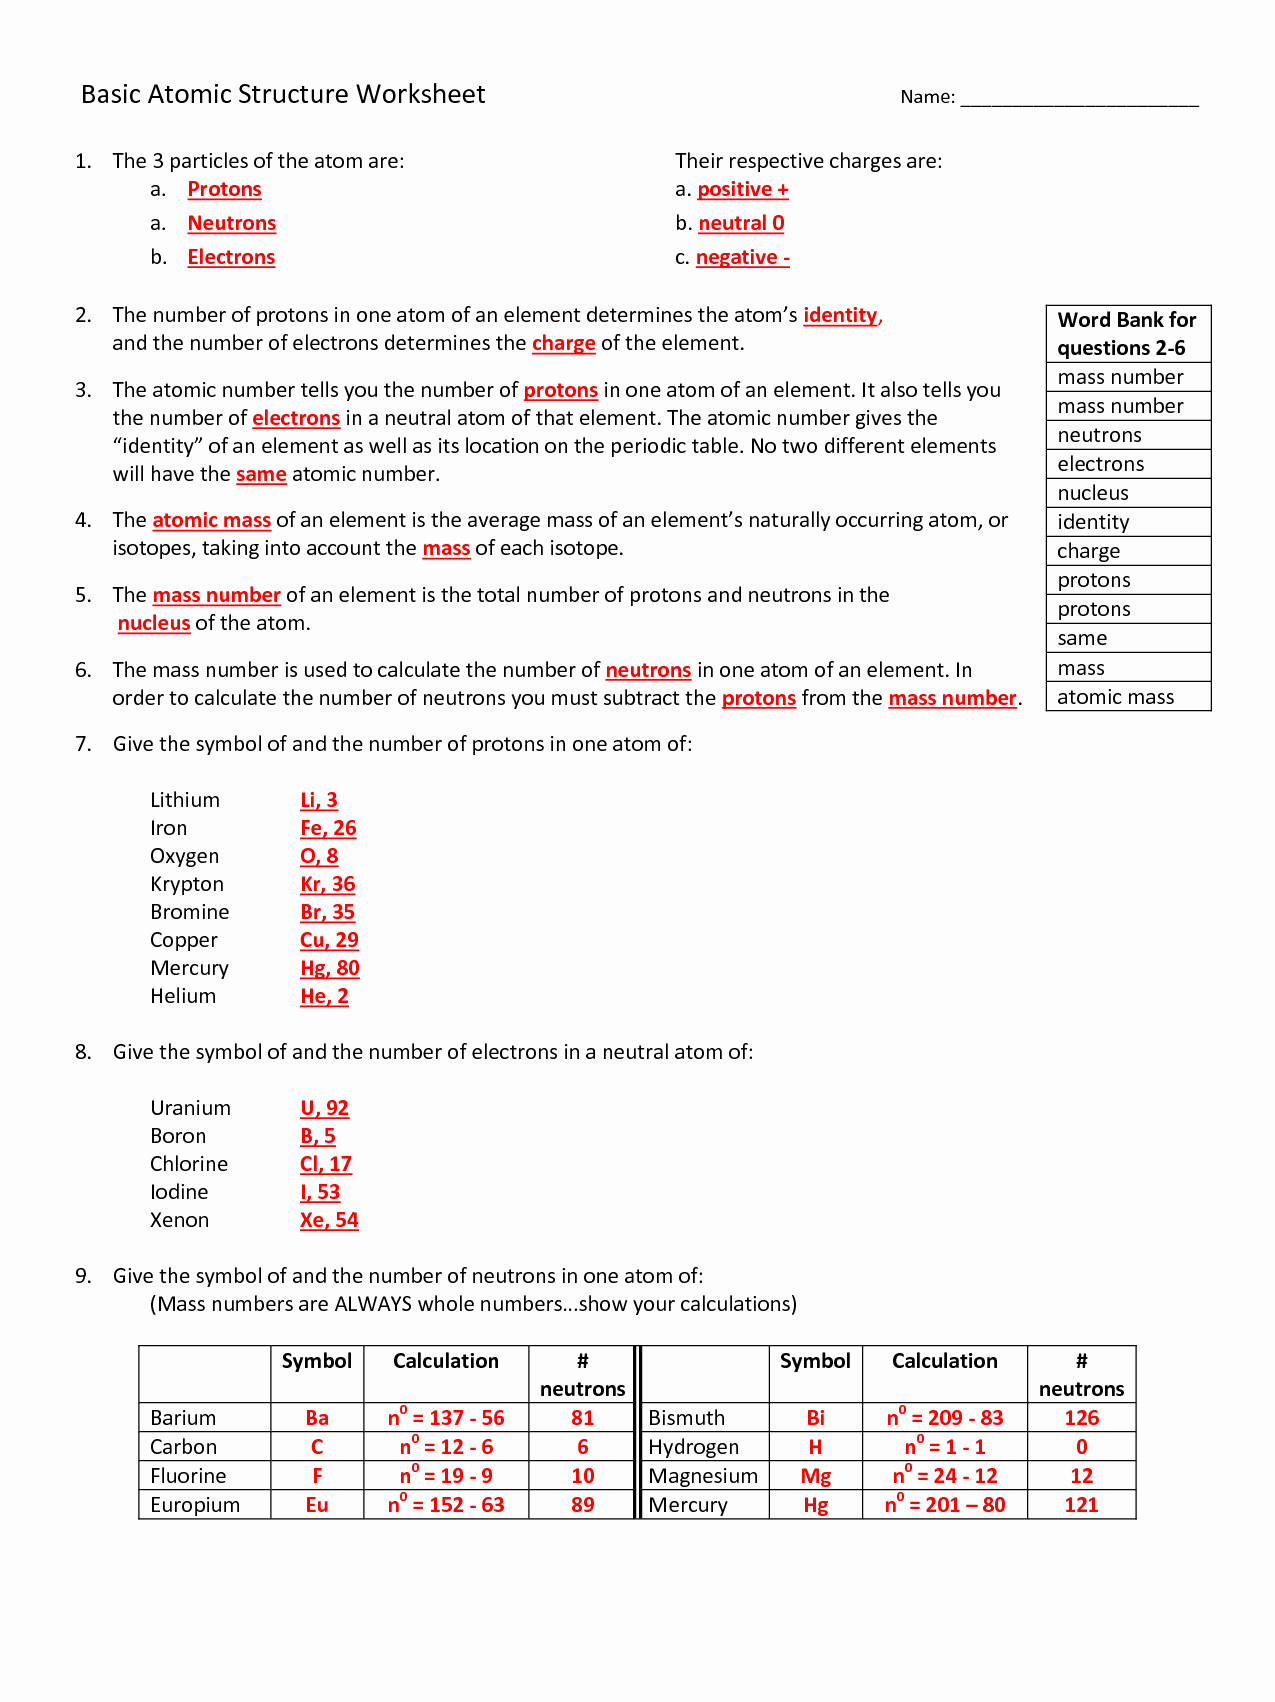 Atomic Structure Worksheet Answers Chemistry Elegant Worksheet Basic atomic Structure Worksheet Answers Grass